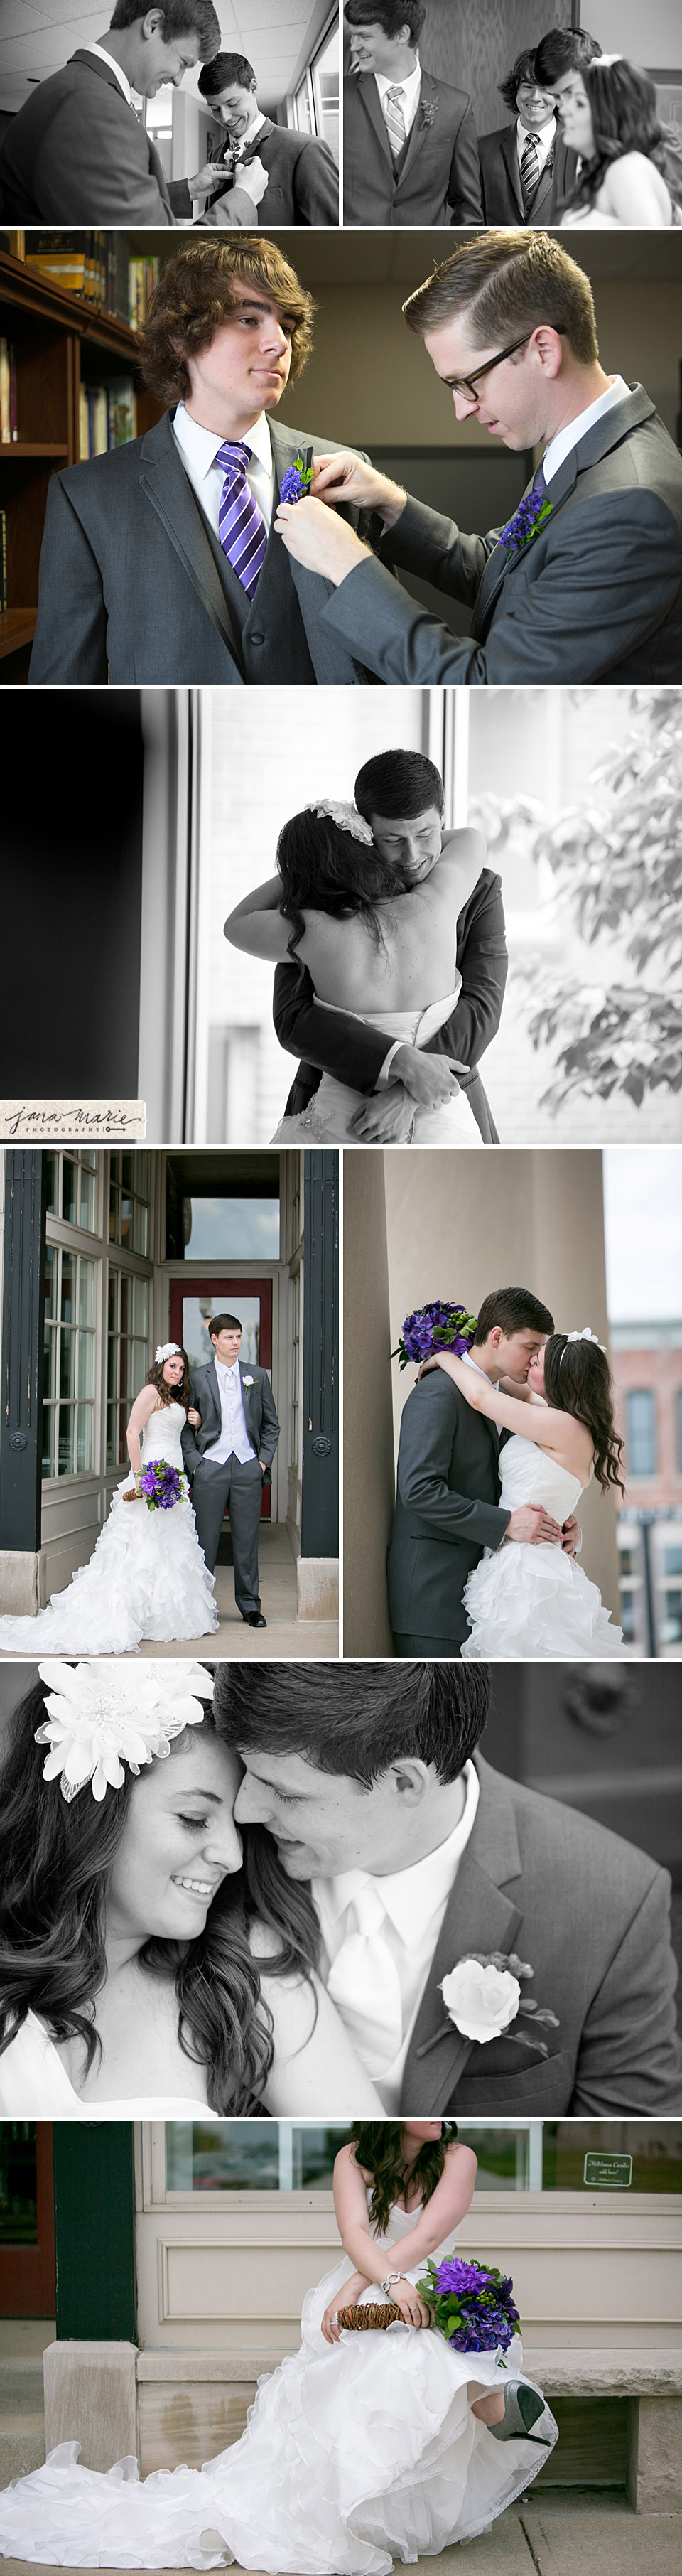 First look, first site, bride and groom, bridal portraits, Jana Marie Photography, KC weddings, The Elks Lodge